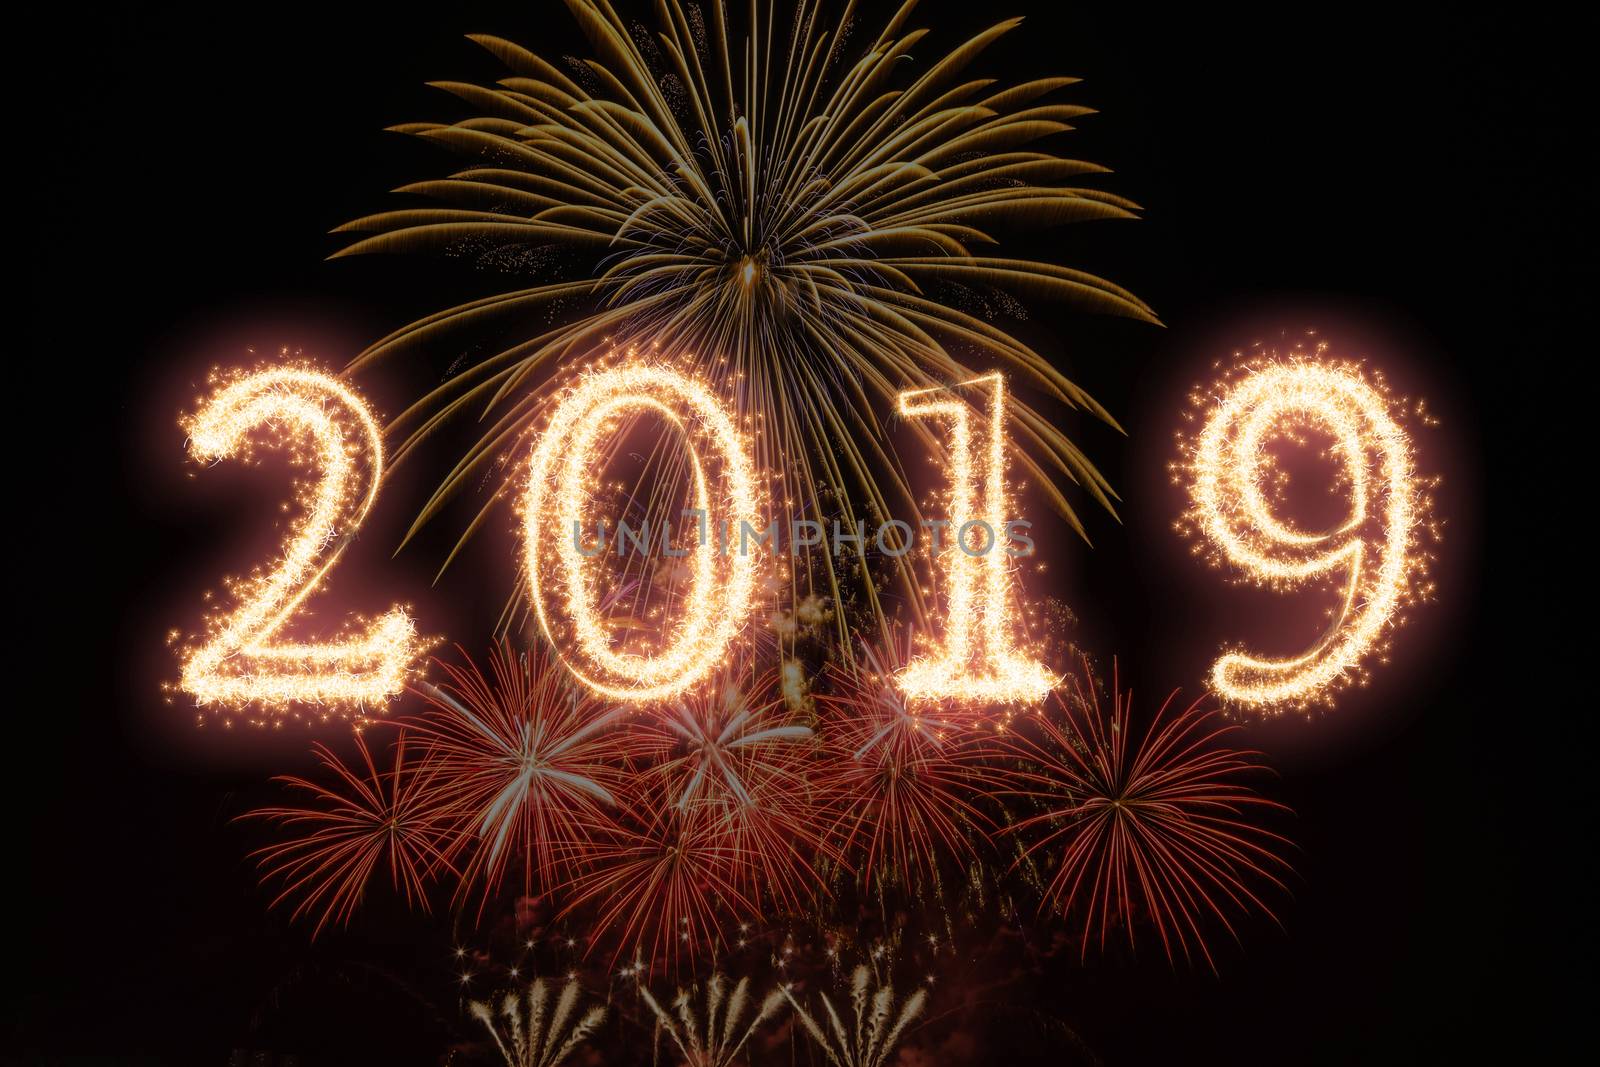 2019 written with Sparkle firework on fireworks with dark background, Happy new year celebration and greeting cards concept